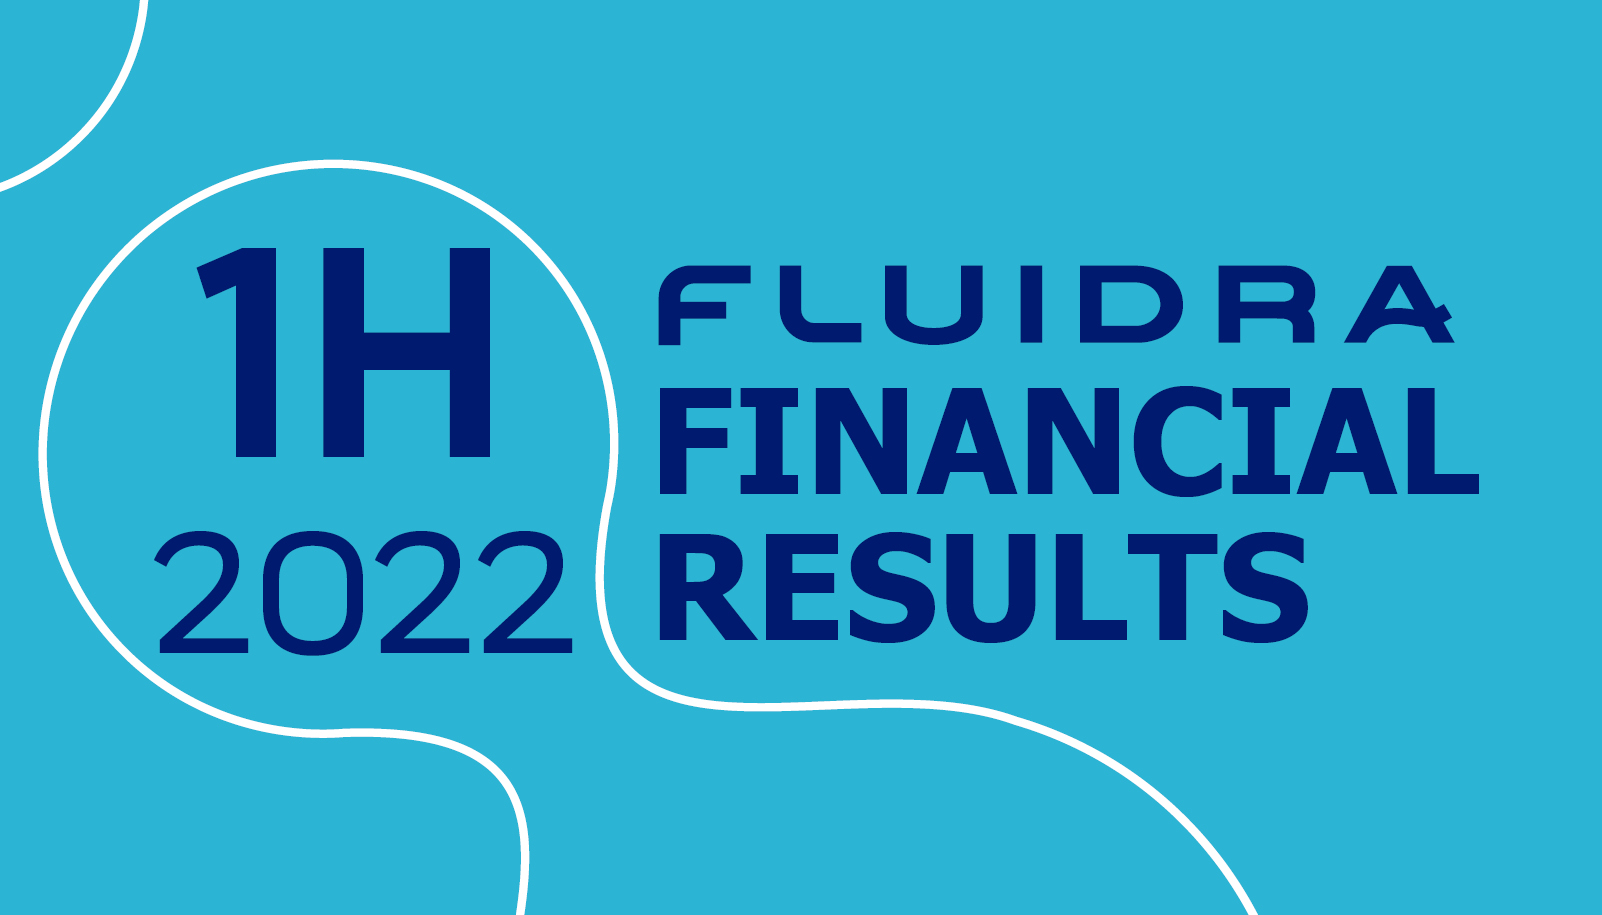 Fluidra sales grew by 22% in the first half of the year